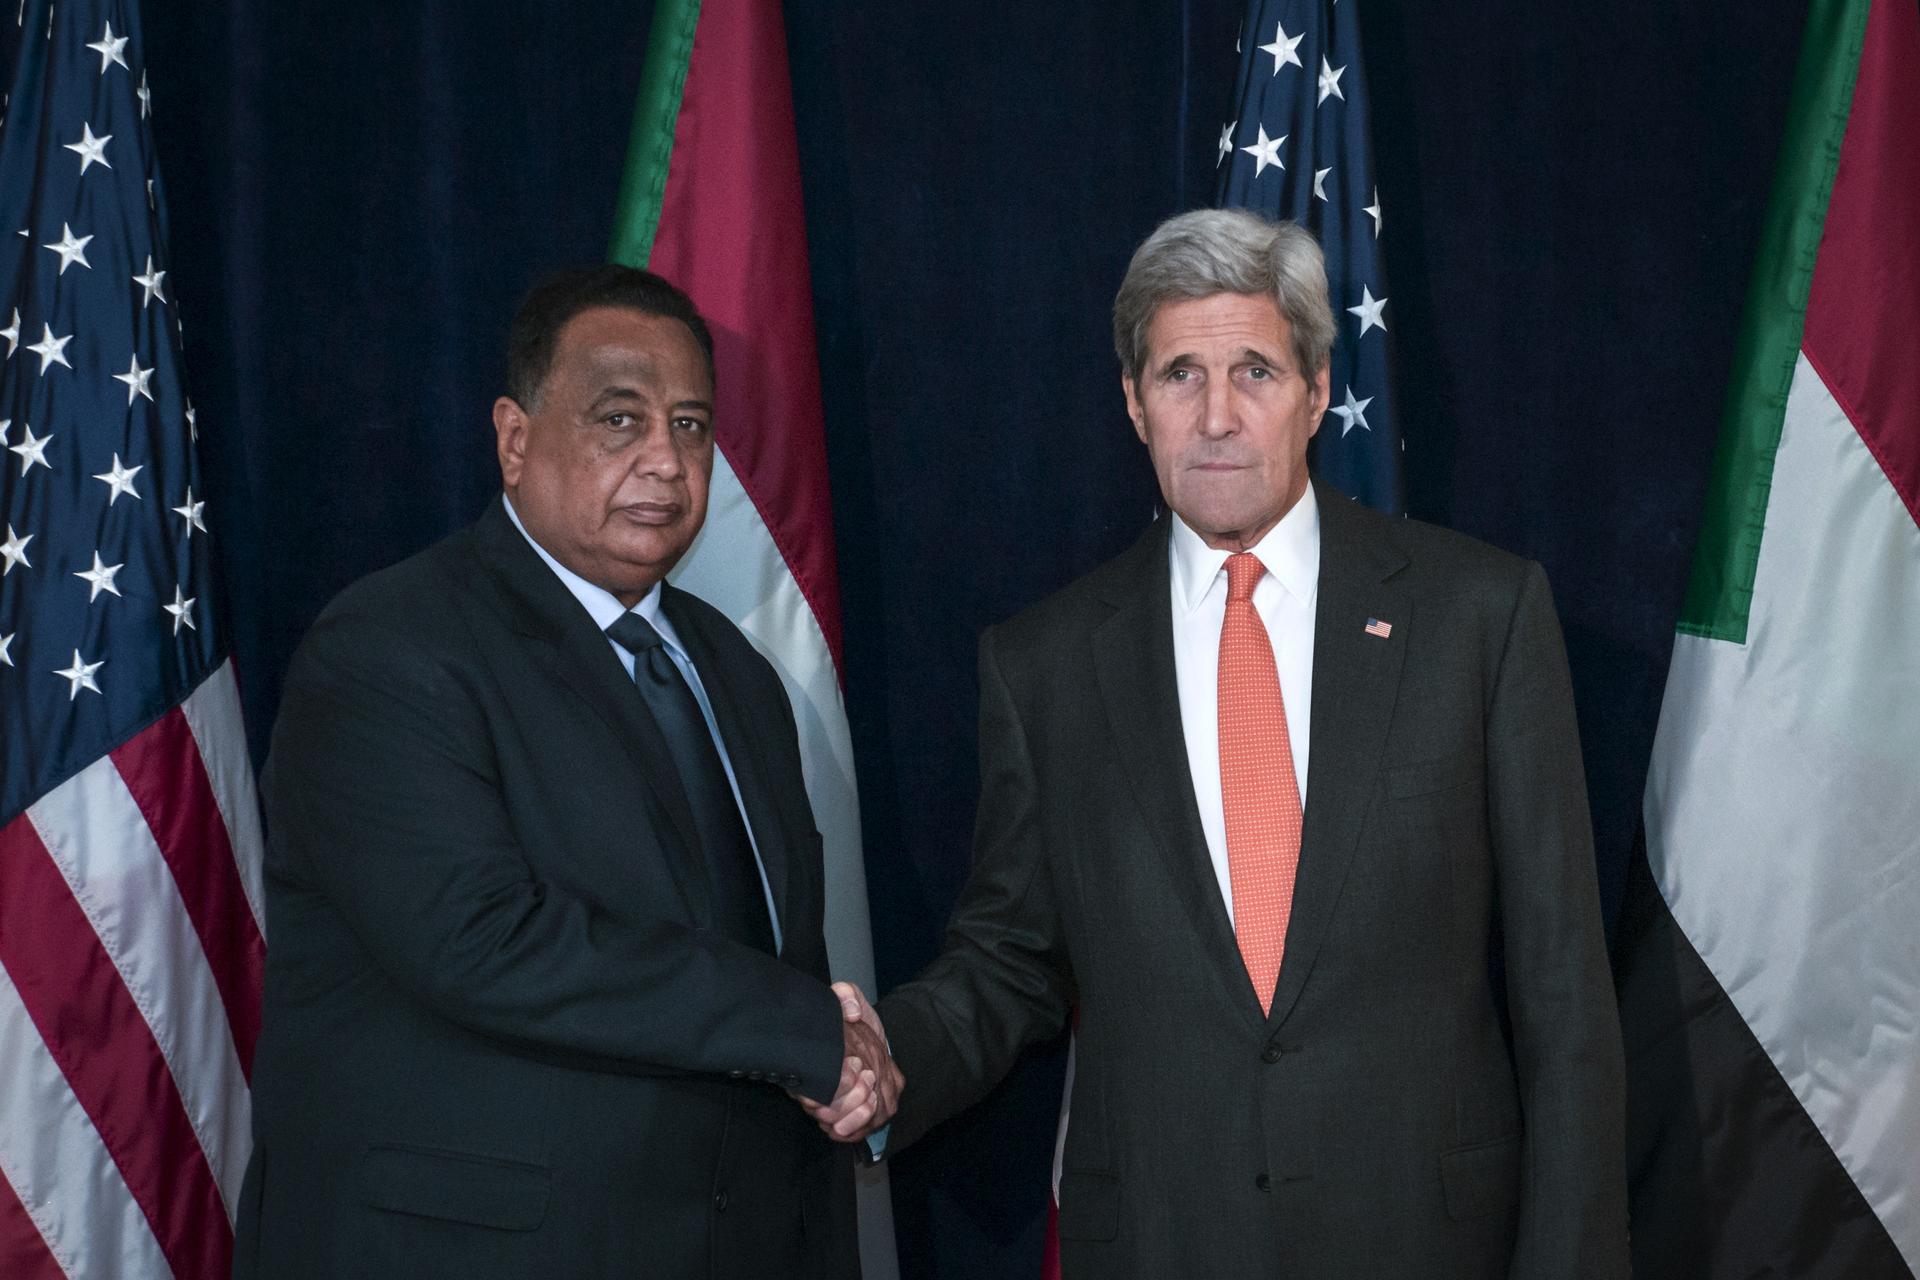 US Secretary of State John Kerry shakes hands with Sudanese Foreign Minister Ibrahim Ghandour as they pose for photos at the Palace Hotel in New York, Oct. 2, 2015.